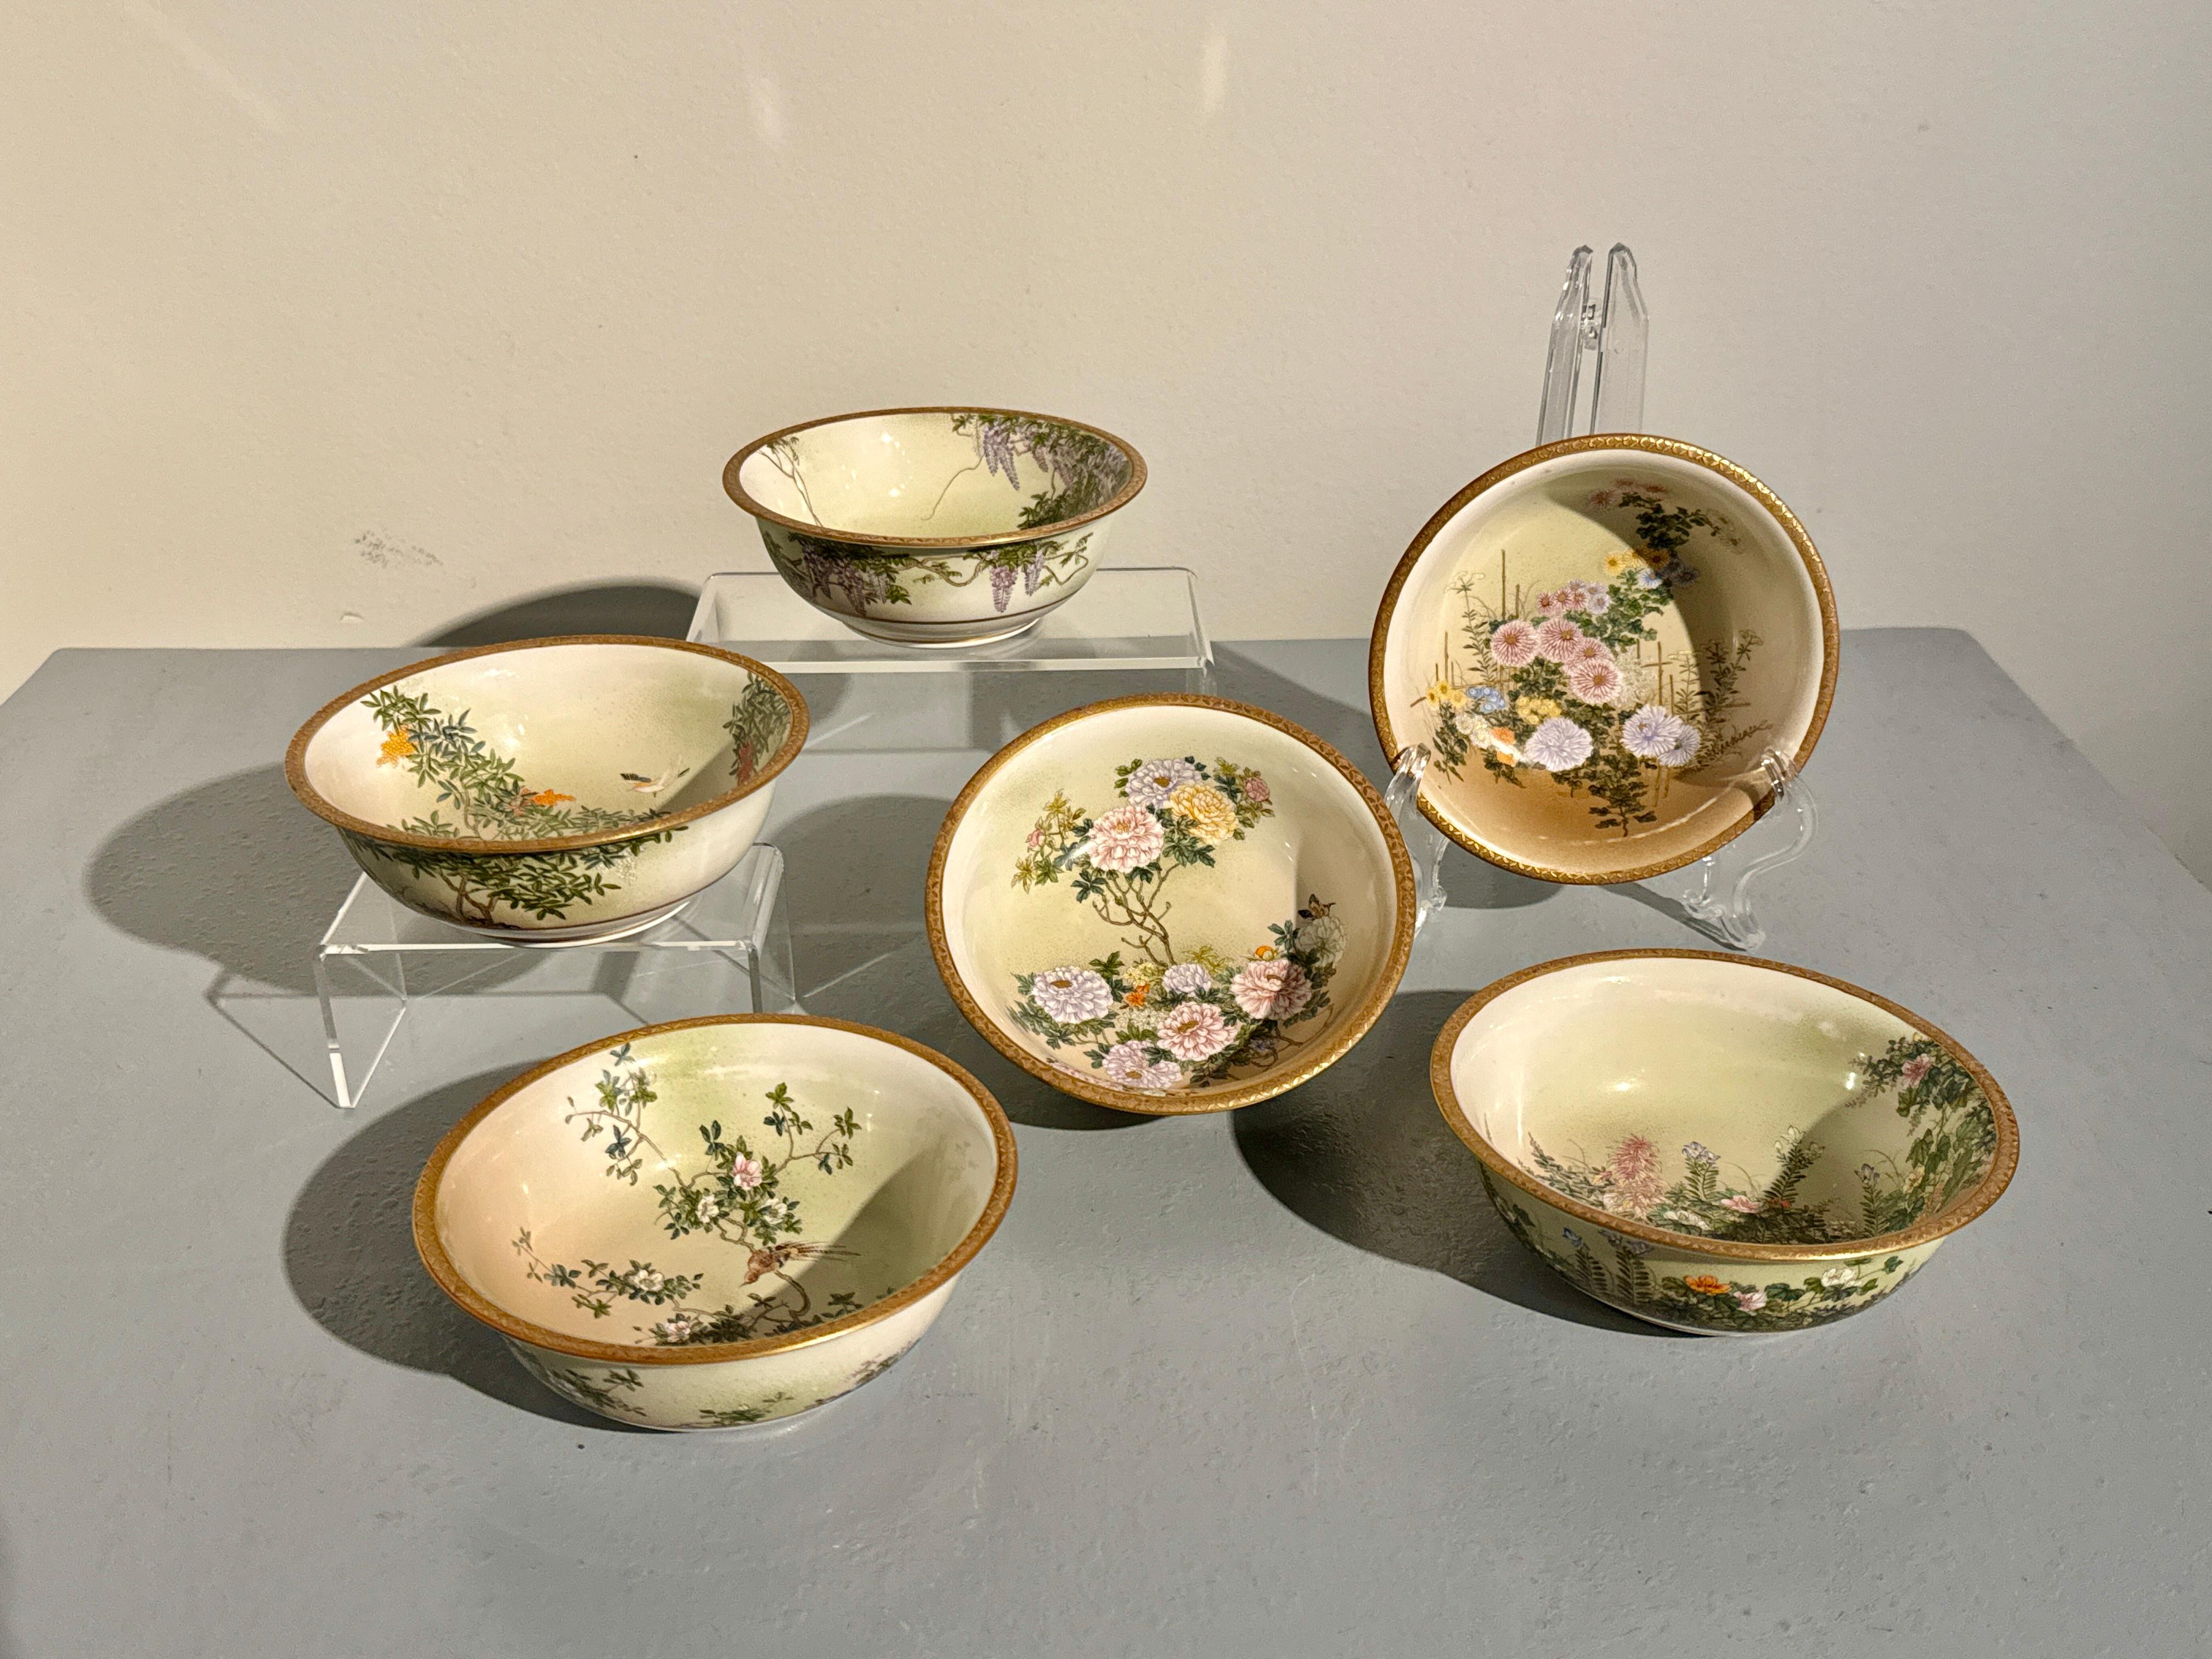 A very fine partial set of six Japanese Satsuma bowls decorated with flowers and birds of the months, signed Kinkozan, Meiji Period, circa 1900, Japan.

The set of six exquisitely painted Satsuma bowls all of fine stoneware glazed with a cream